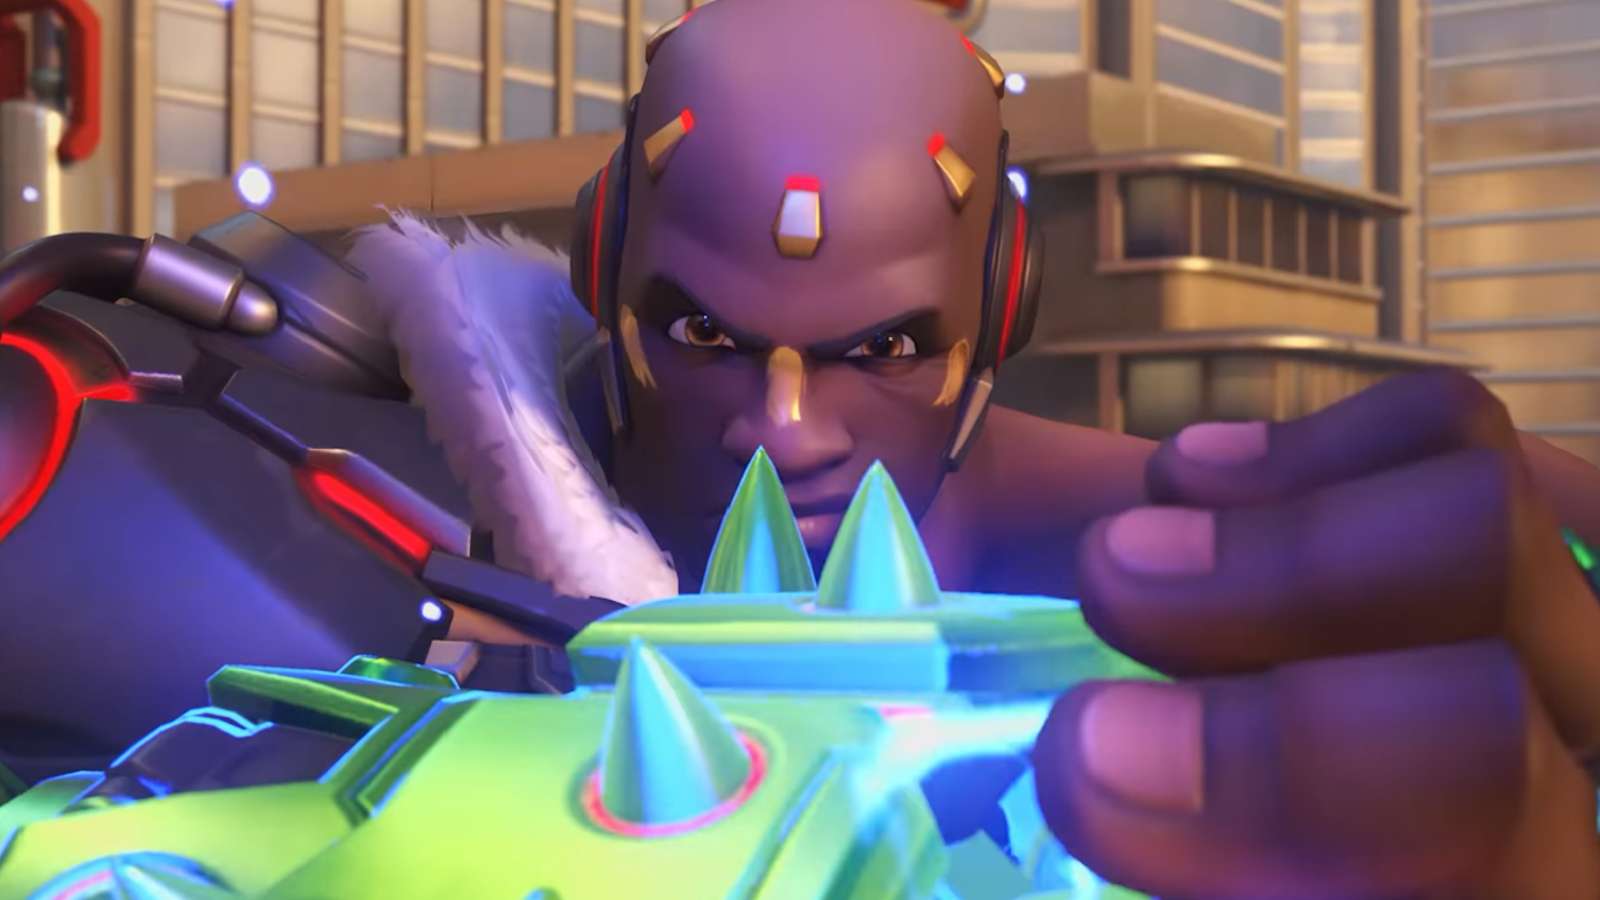 doomfist punching his palm with jade weapon skin